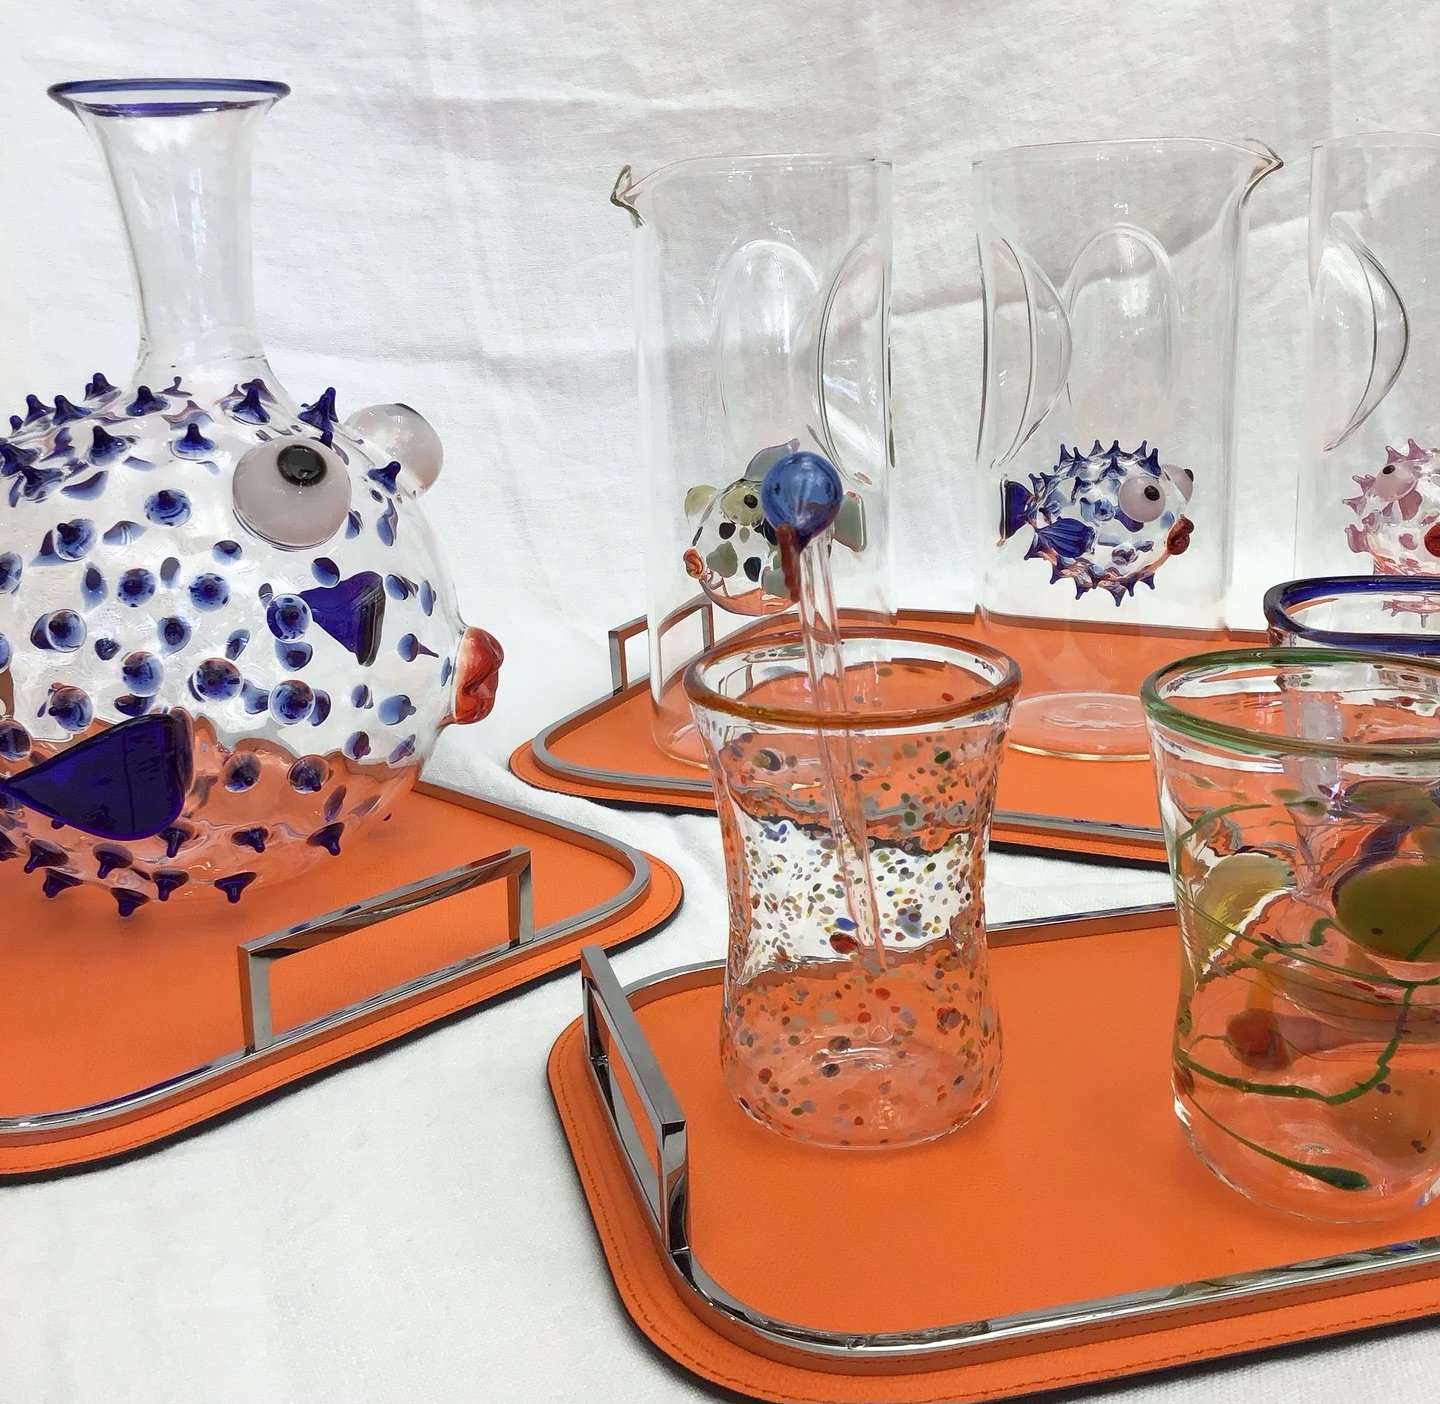 New Luxury new design glassware 🐡Only the best blowers from Italy can make these limited carafes and glasses in fun colorful designs - too many styles to choose from🎉 
.
.
#italia #blowfish #color #handmade #new #tablescapes #havingfun #glass #mura